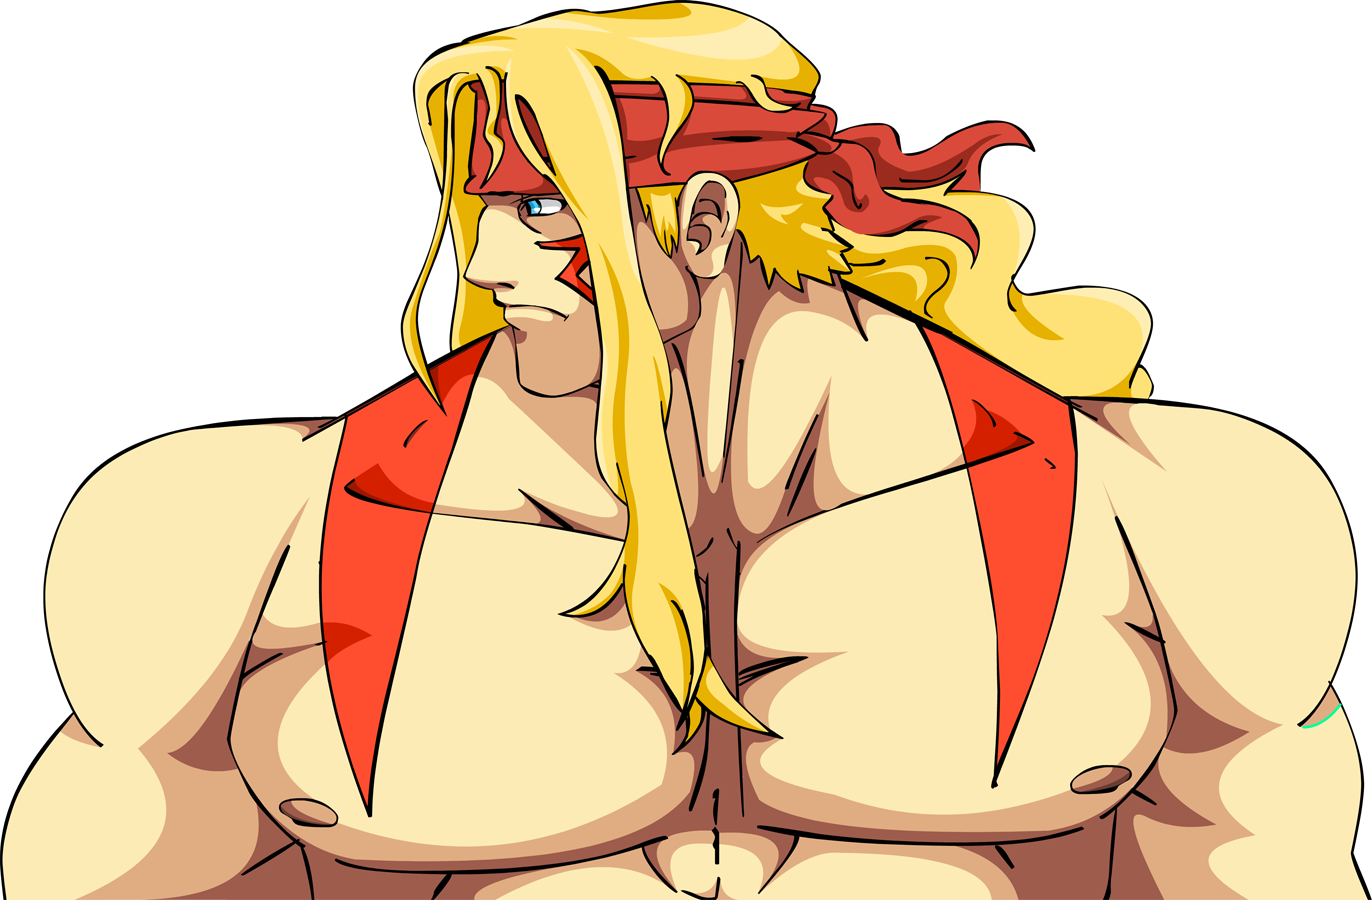 Aex from Street Fighter Art